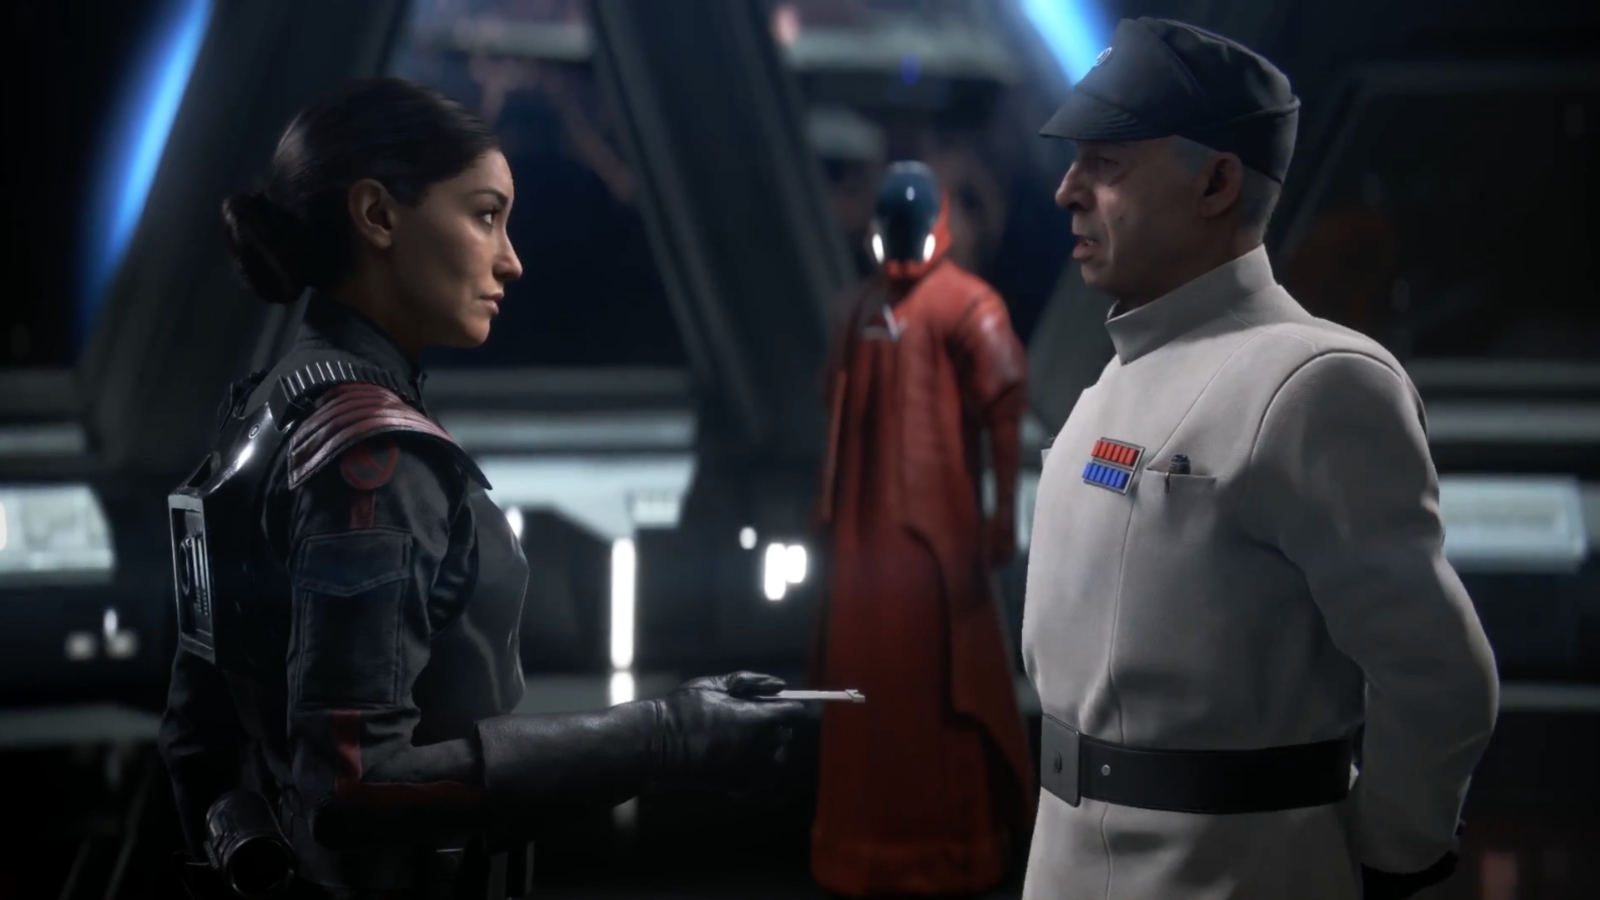 We’ve Finally Seen A Campaign Mission From Star Wars: Battlefront II